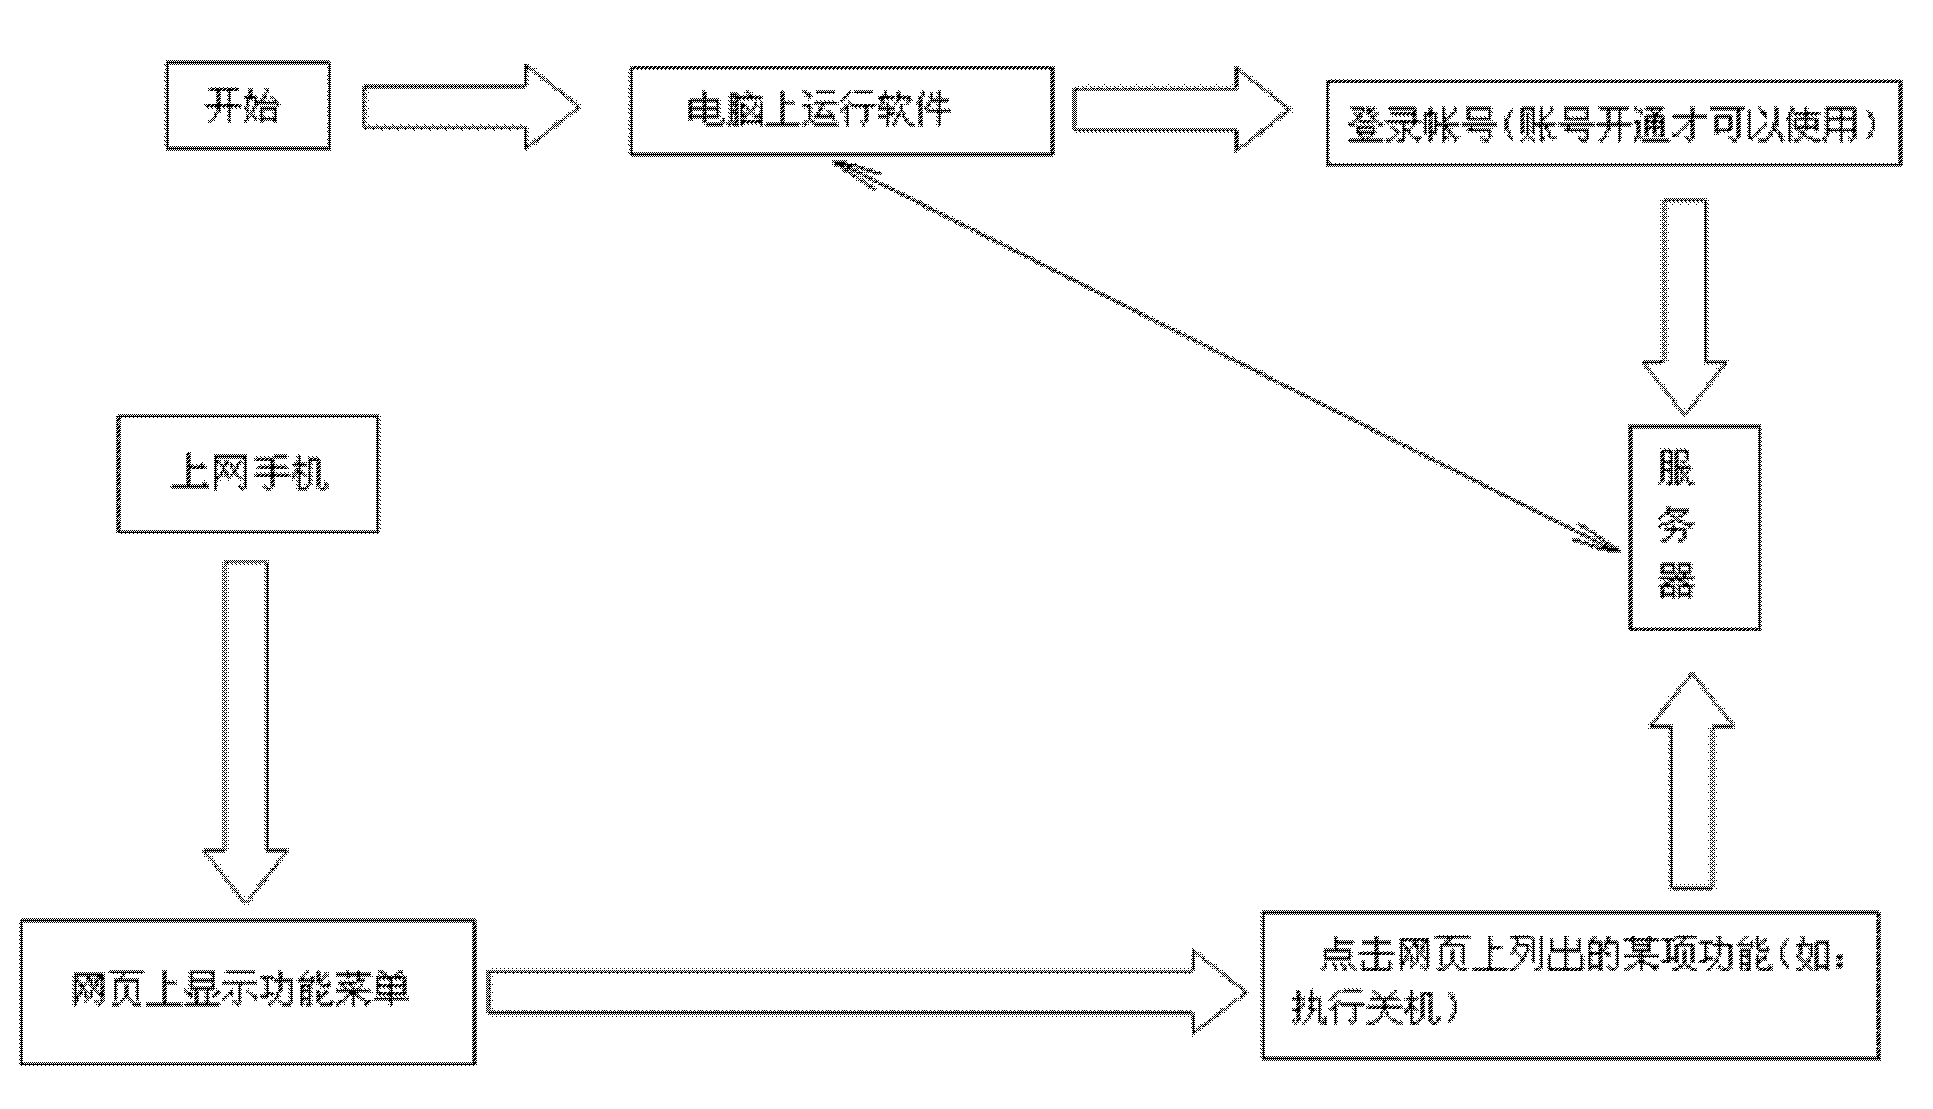 Method for remotely controlling computer by using mobile phone